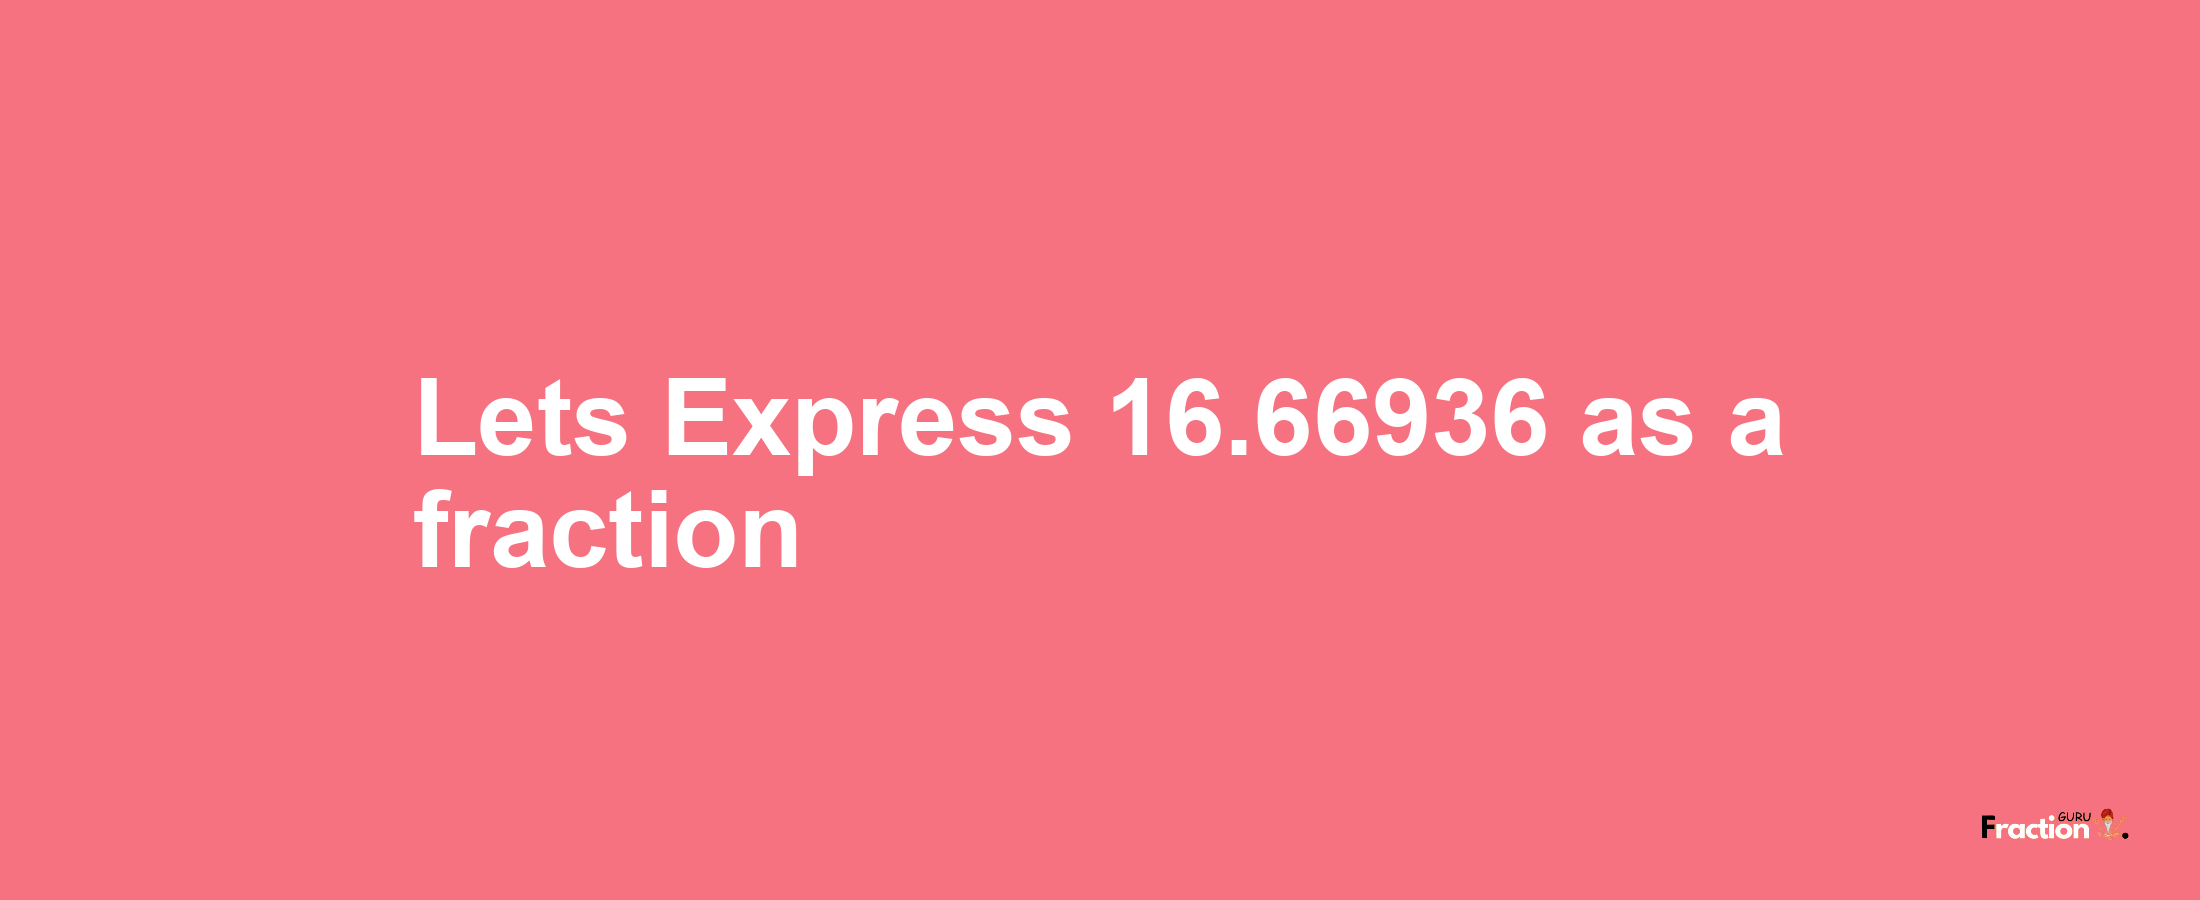 Lets Express 16.66936 as afraction